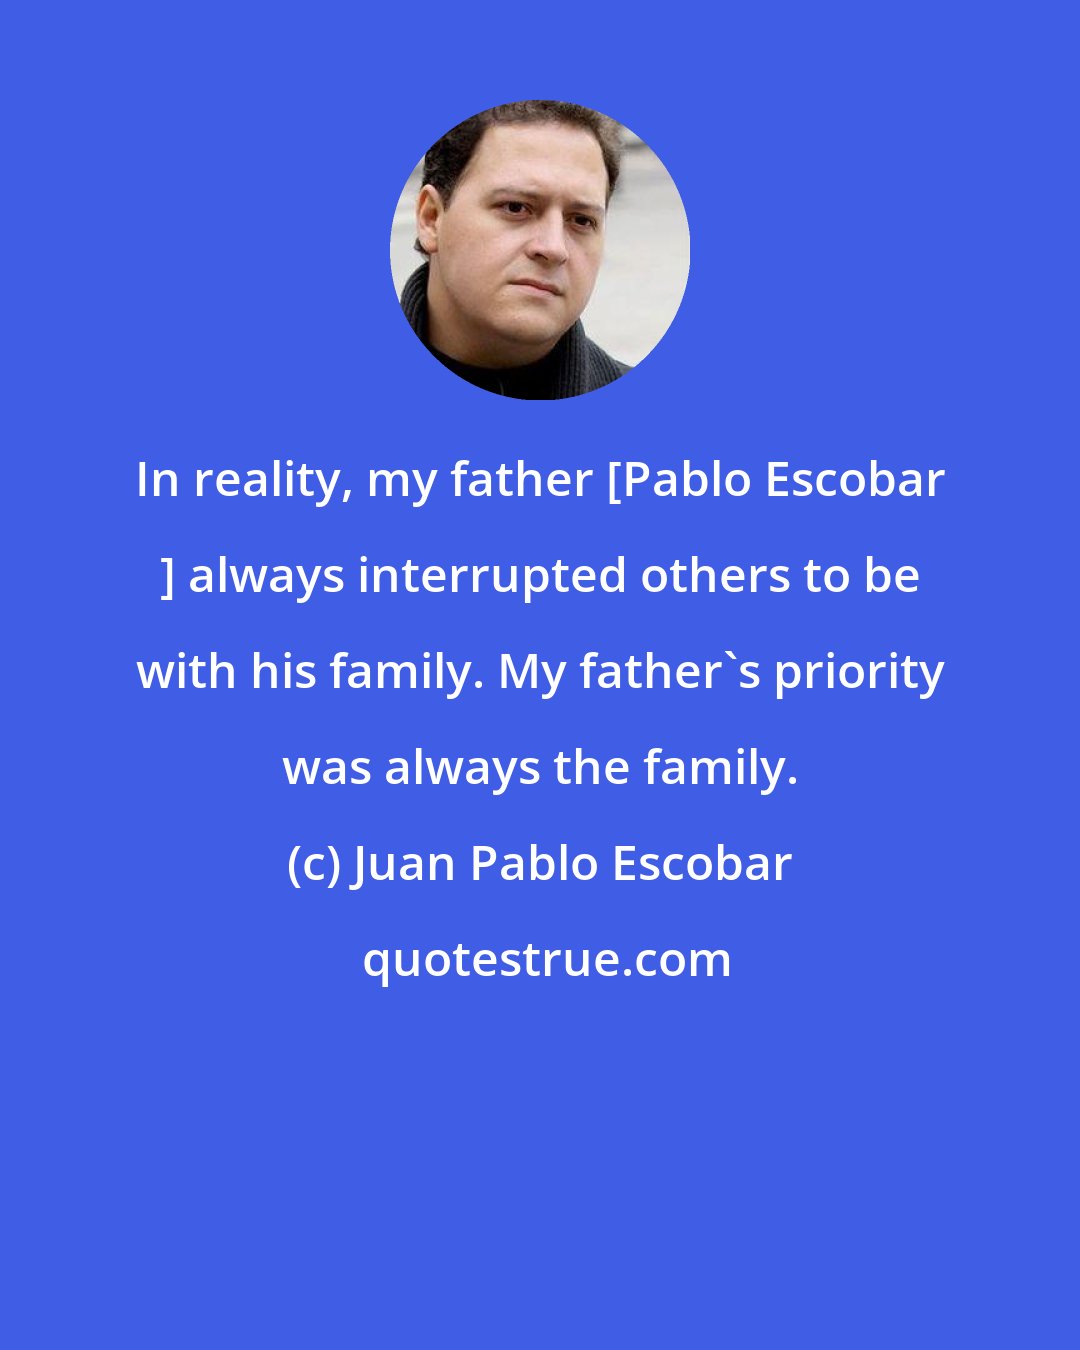 Juan Pablo Escobar: In reality, my father [Pablo Escobar ] always interrupted others to be with his family. My father's priority was always the family.